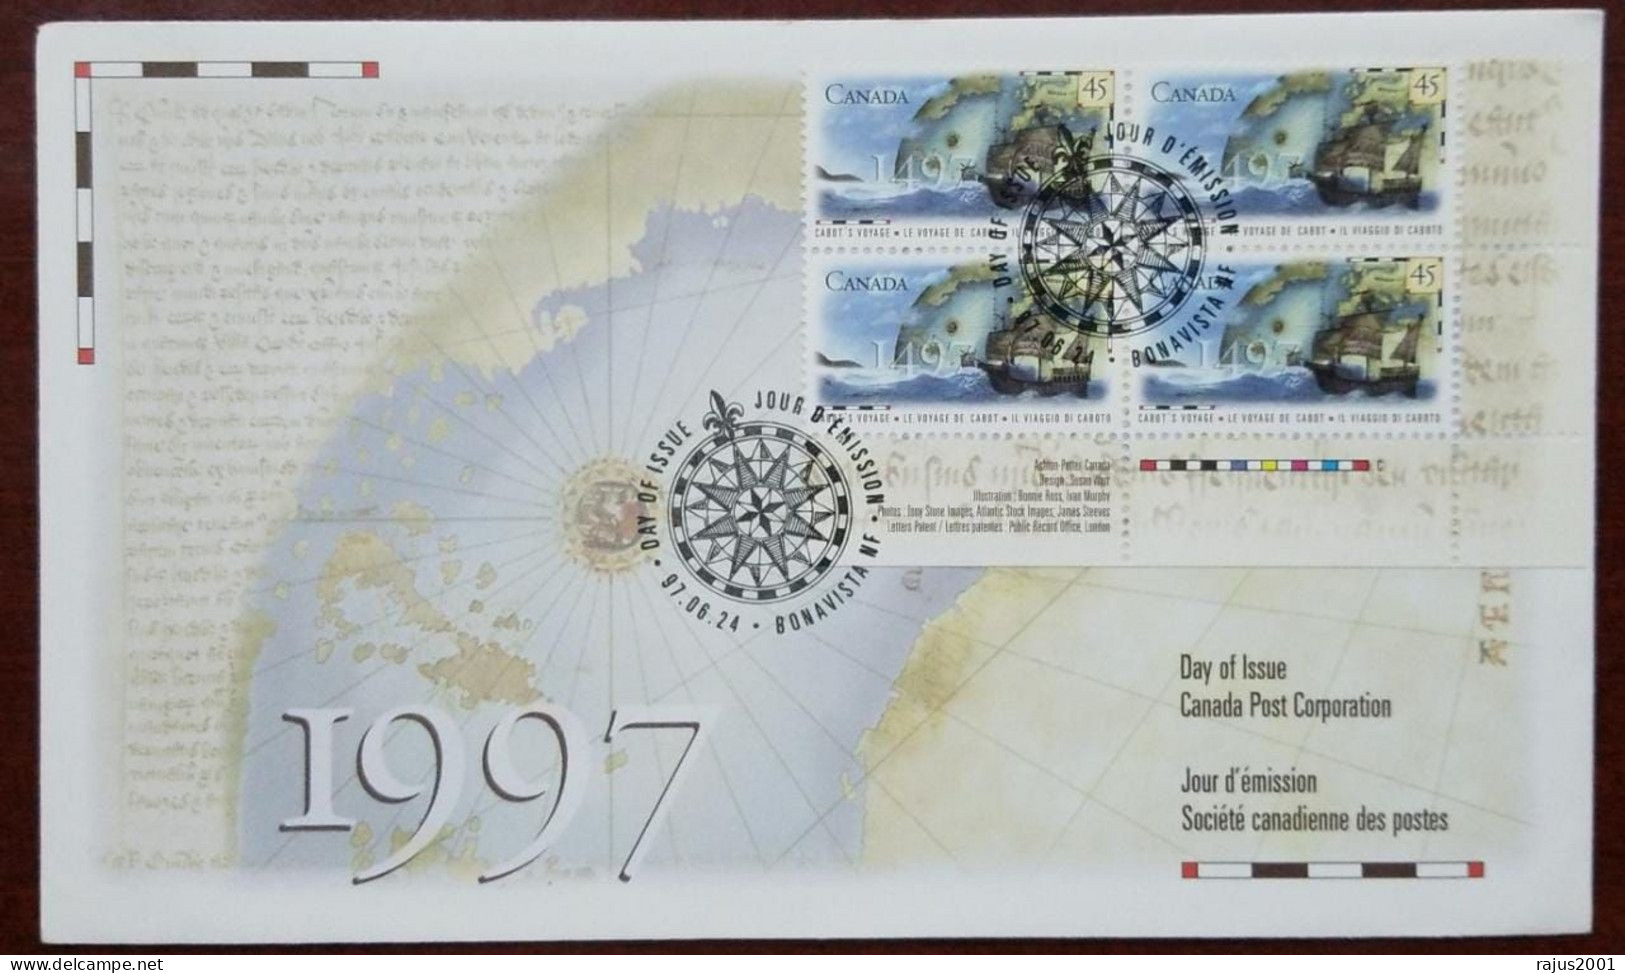 500th Anniversary Of Cabot's Expedition, Cabot's Voyage, JOHN CABOT, Italian Navigator and Explorer, Compass, Canada FDC - Polarforscher & Promis